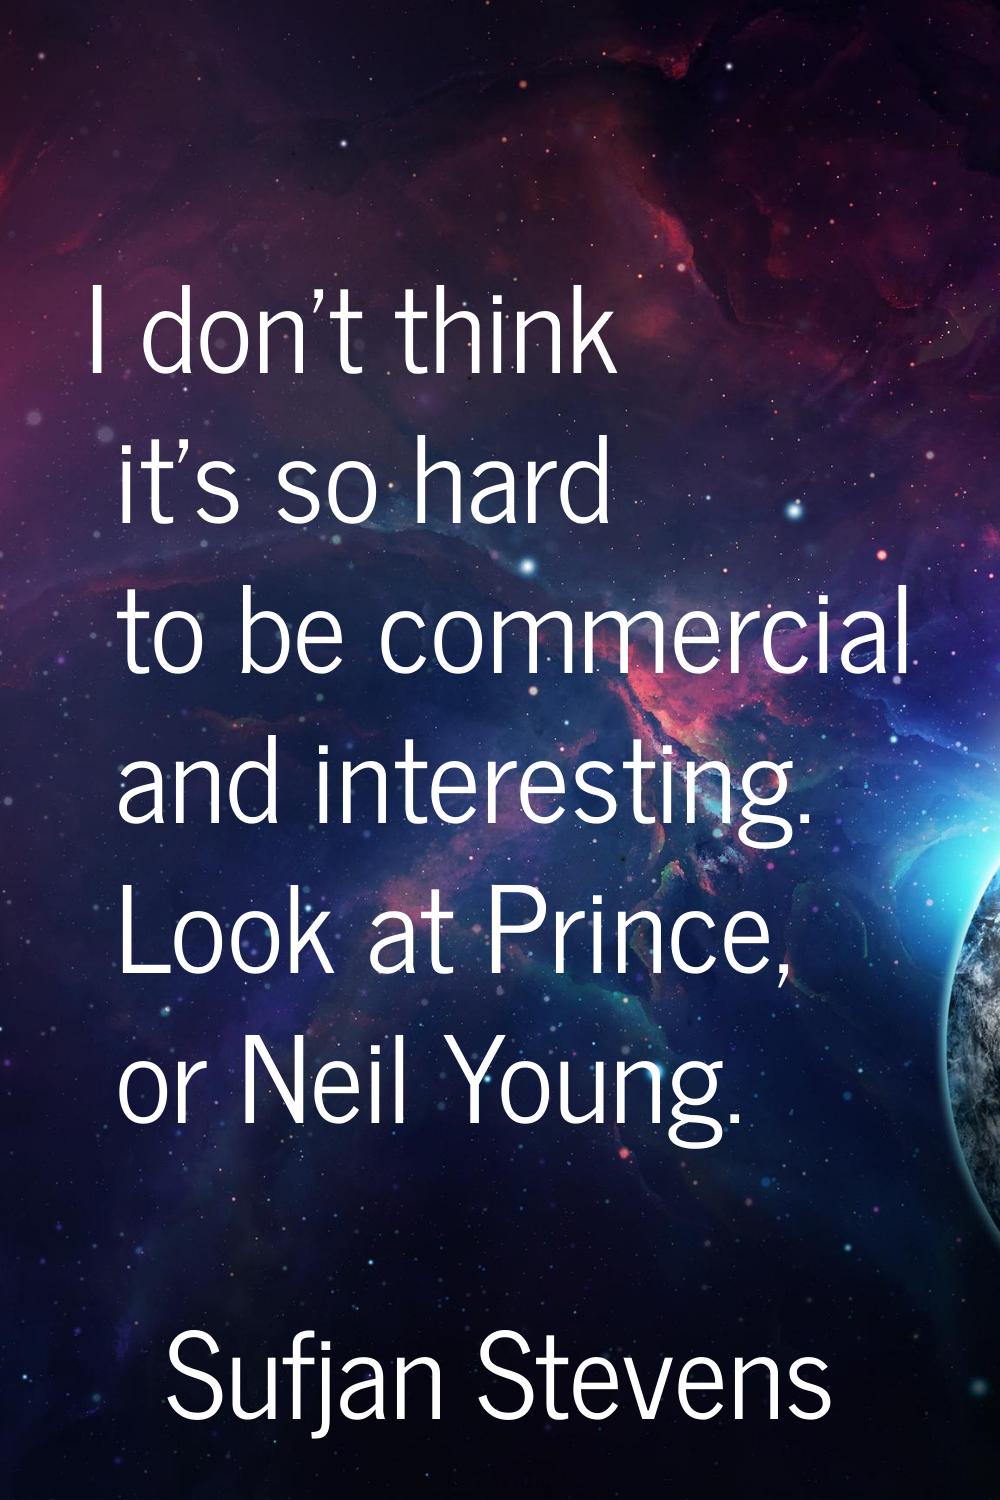 I don't think it's so hard to be commercial and interesting. Look at Prince, or Neil Young.